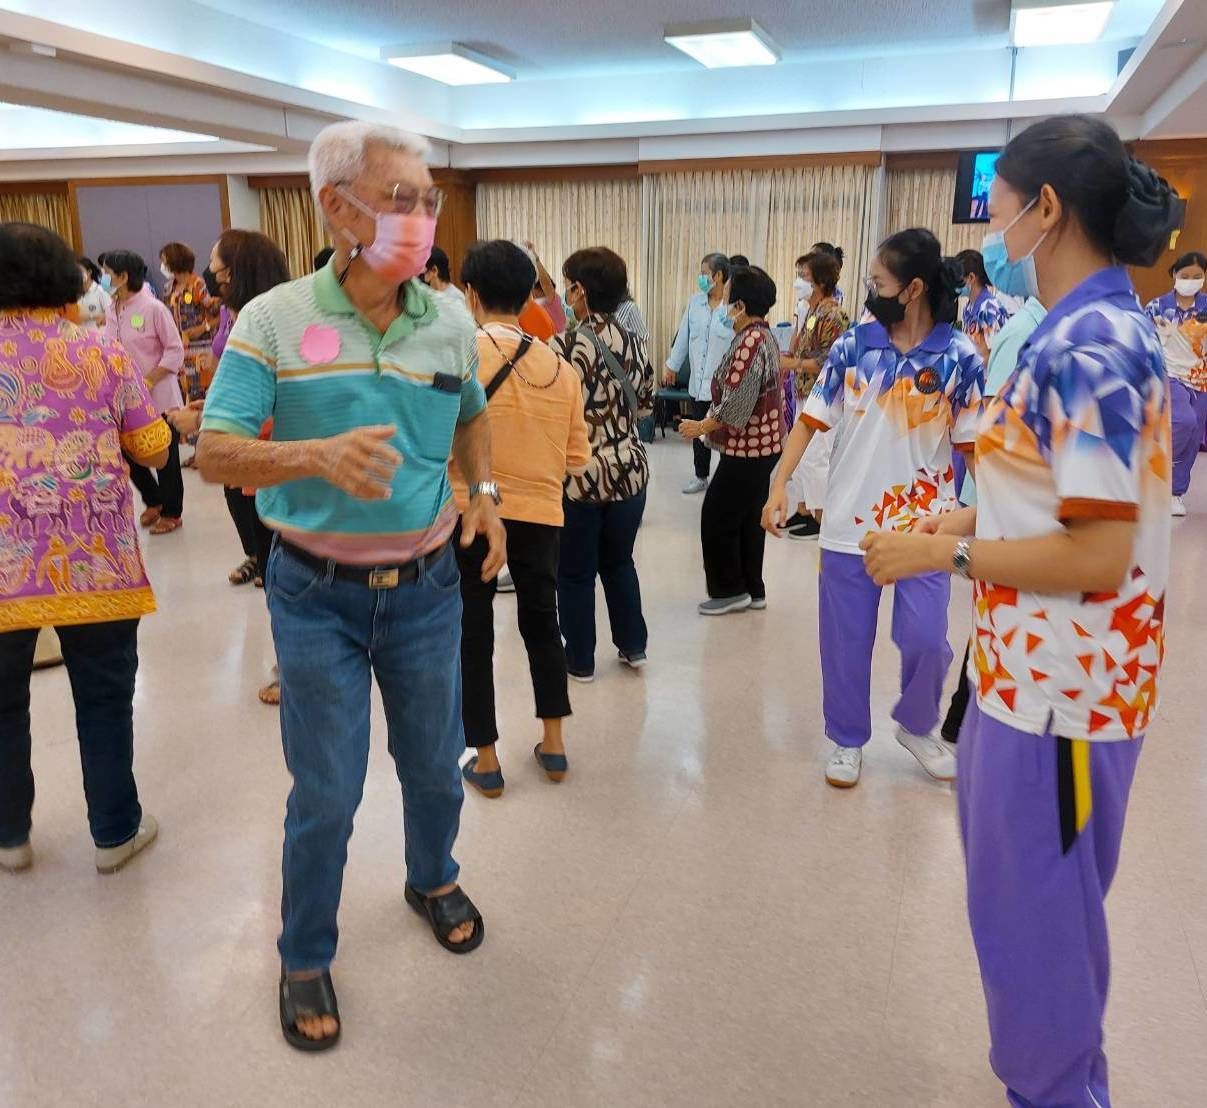 Nursing students gives instruction to the aging group to practice everyday for a better health.